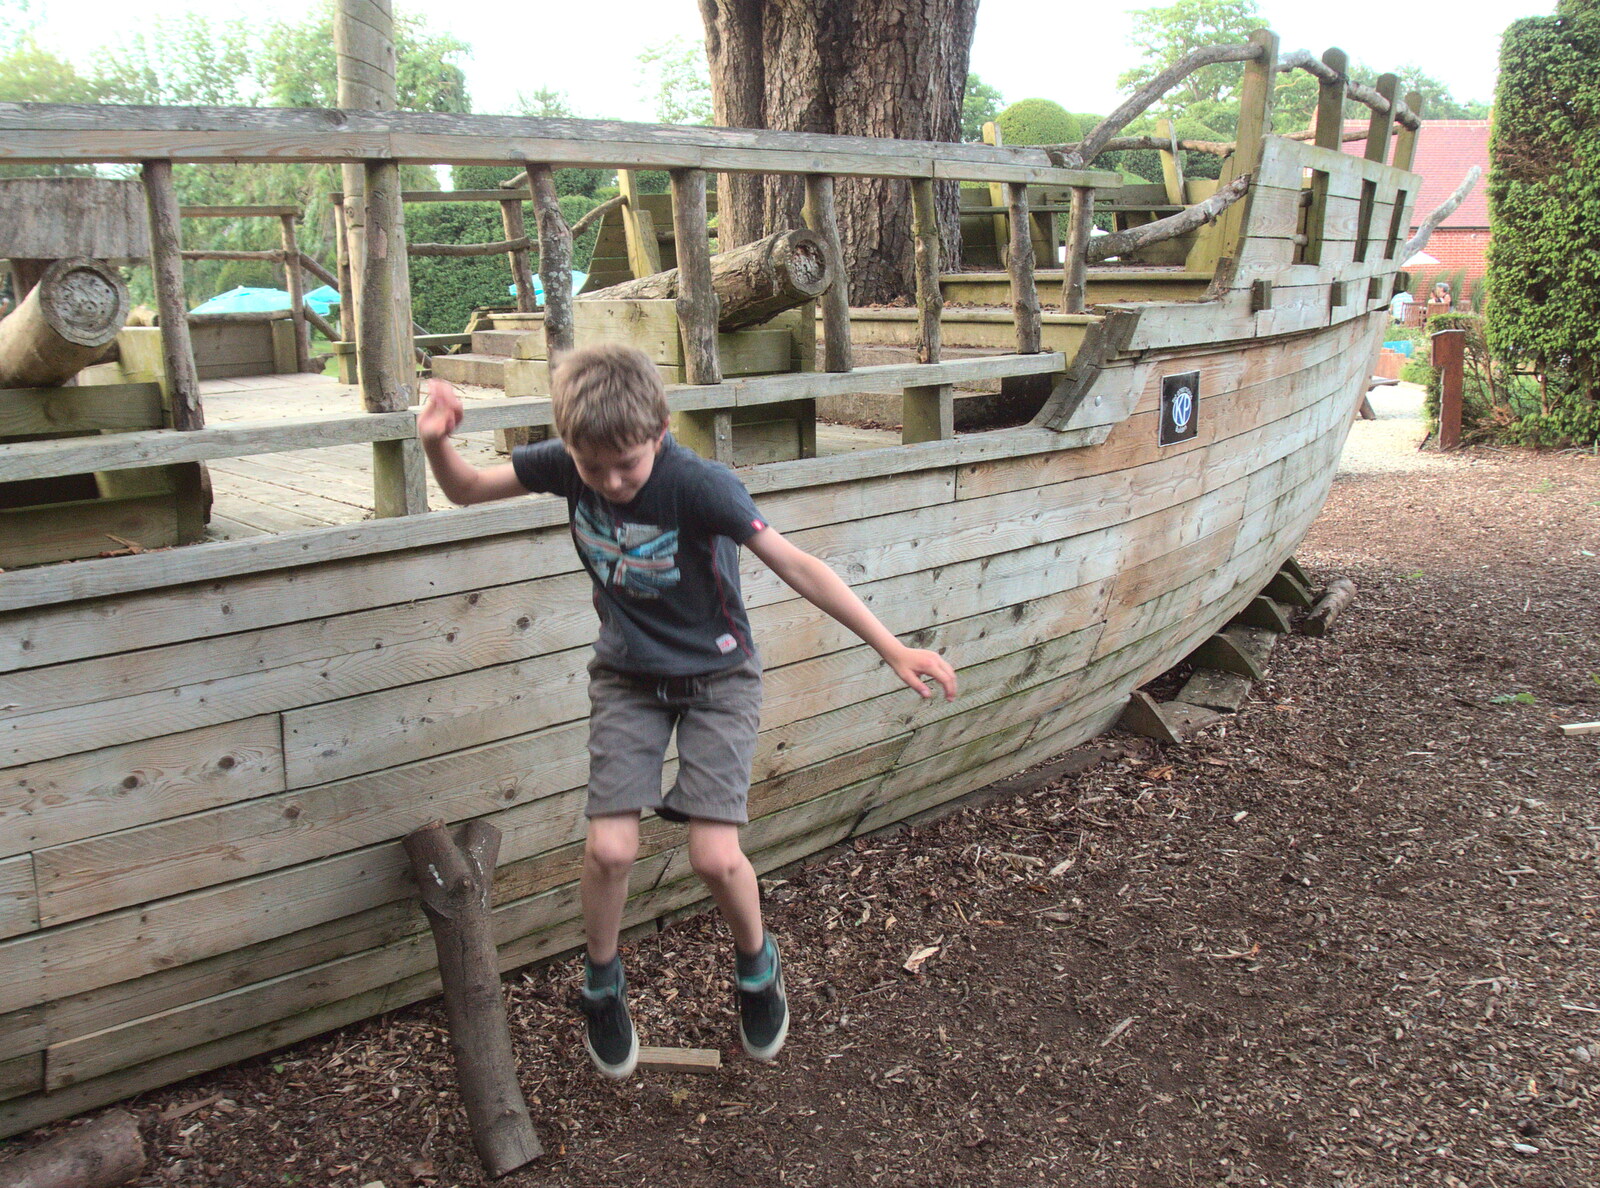 Fred hurls himself off the pirate ship from The Not-Opening of the Palgrave Playground, Palgrave, Suffolk - 3rd June 2018